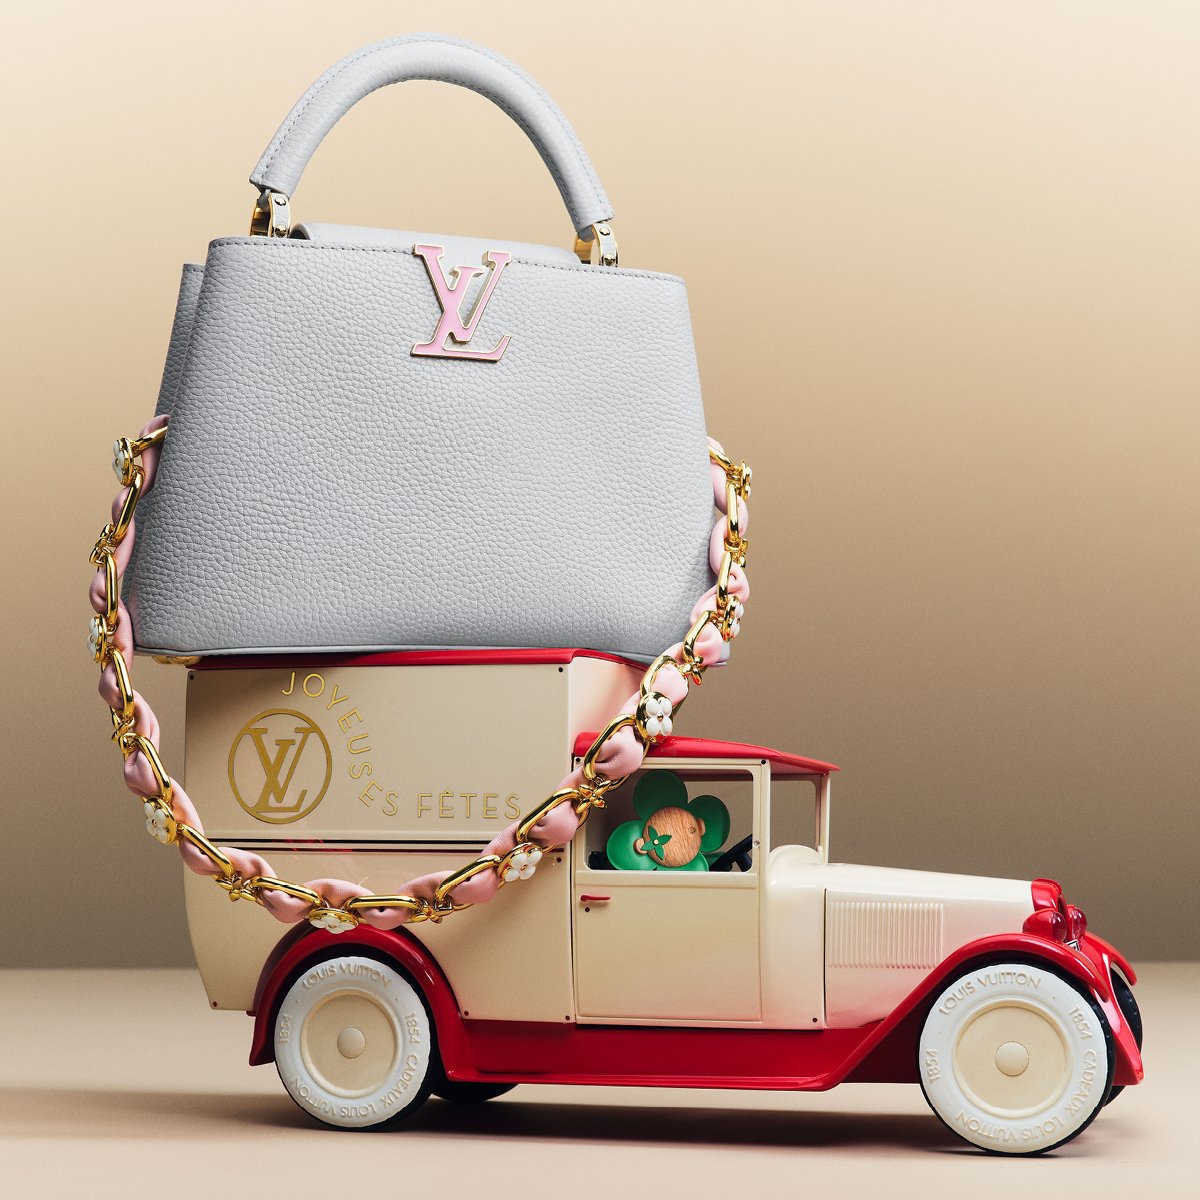 Discover the new Louis Vuitton Travel Books Collection Welcome to